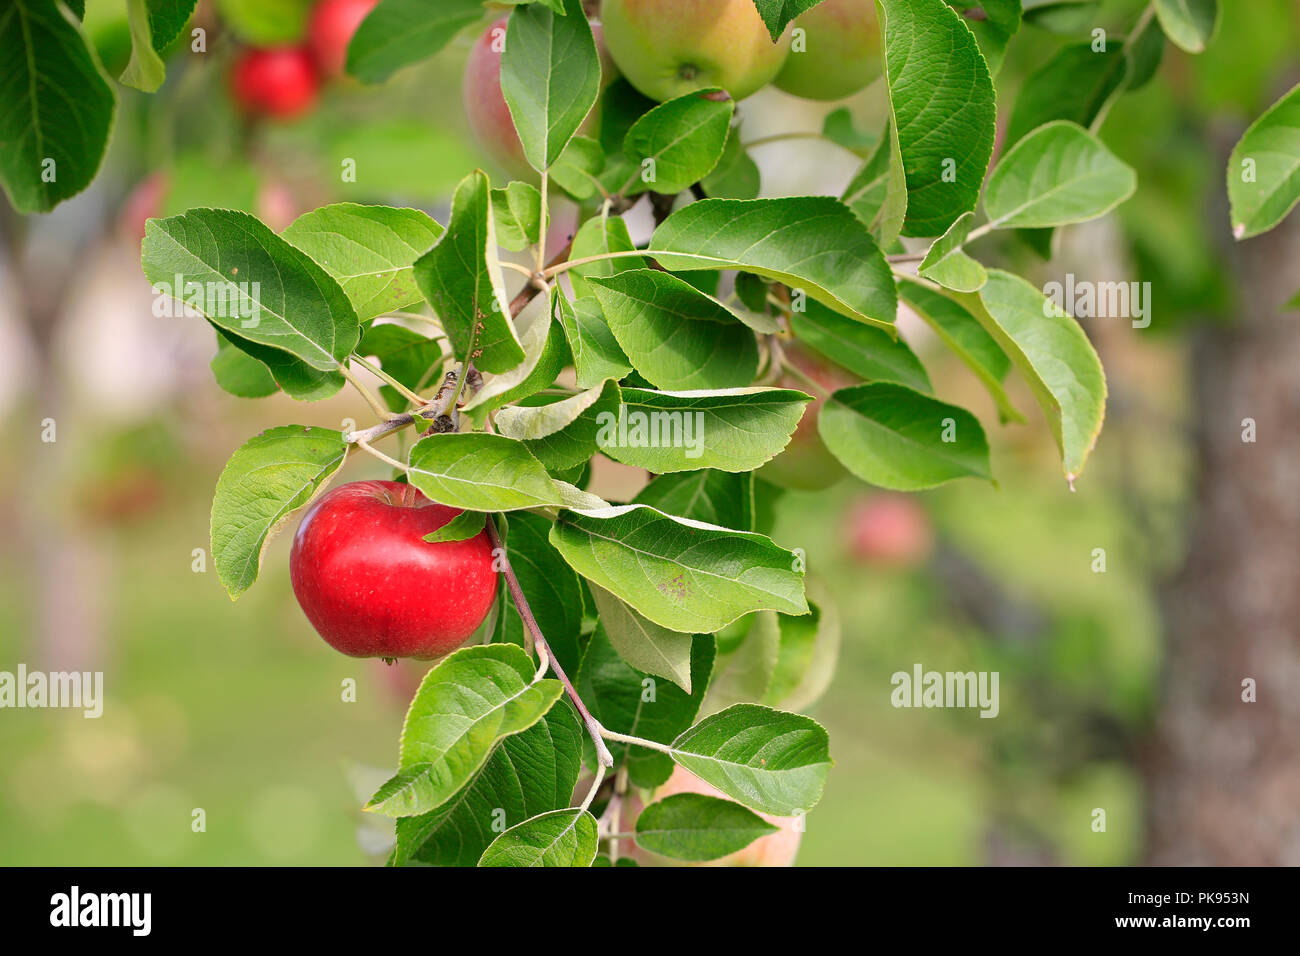 Red ripe apple growing on the apple tree branch with green foliage in early autumn. Stock Photo